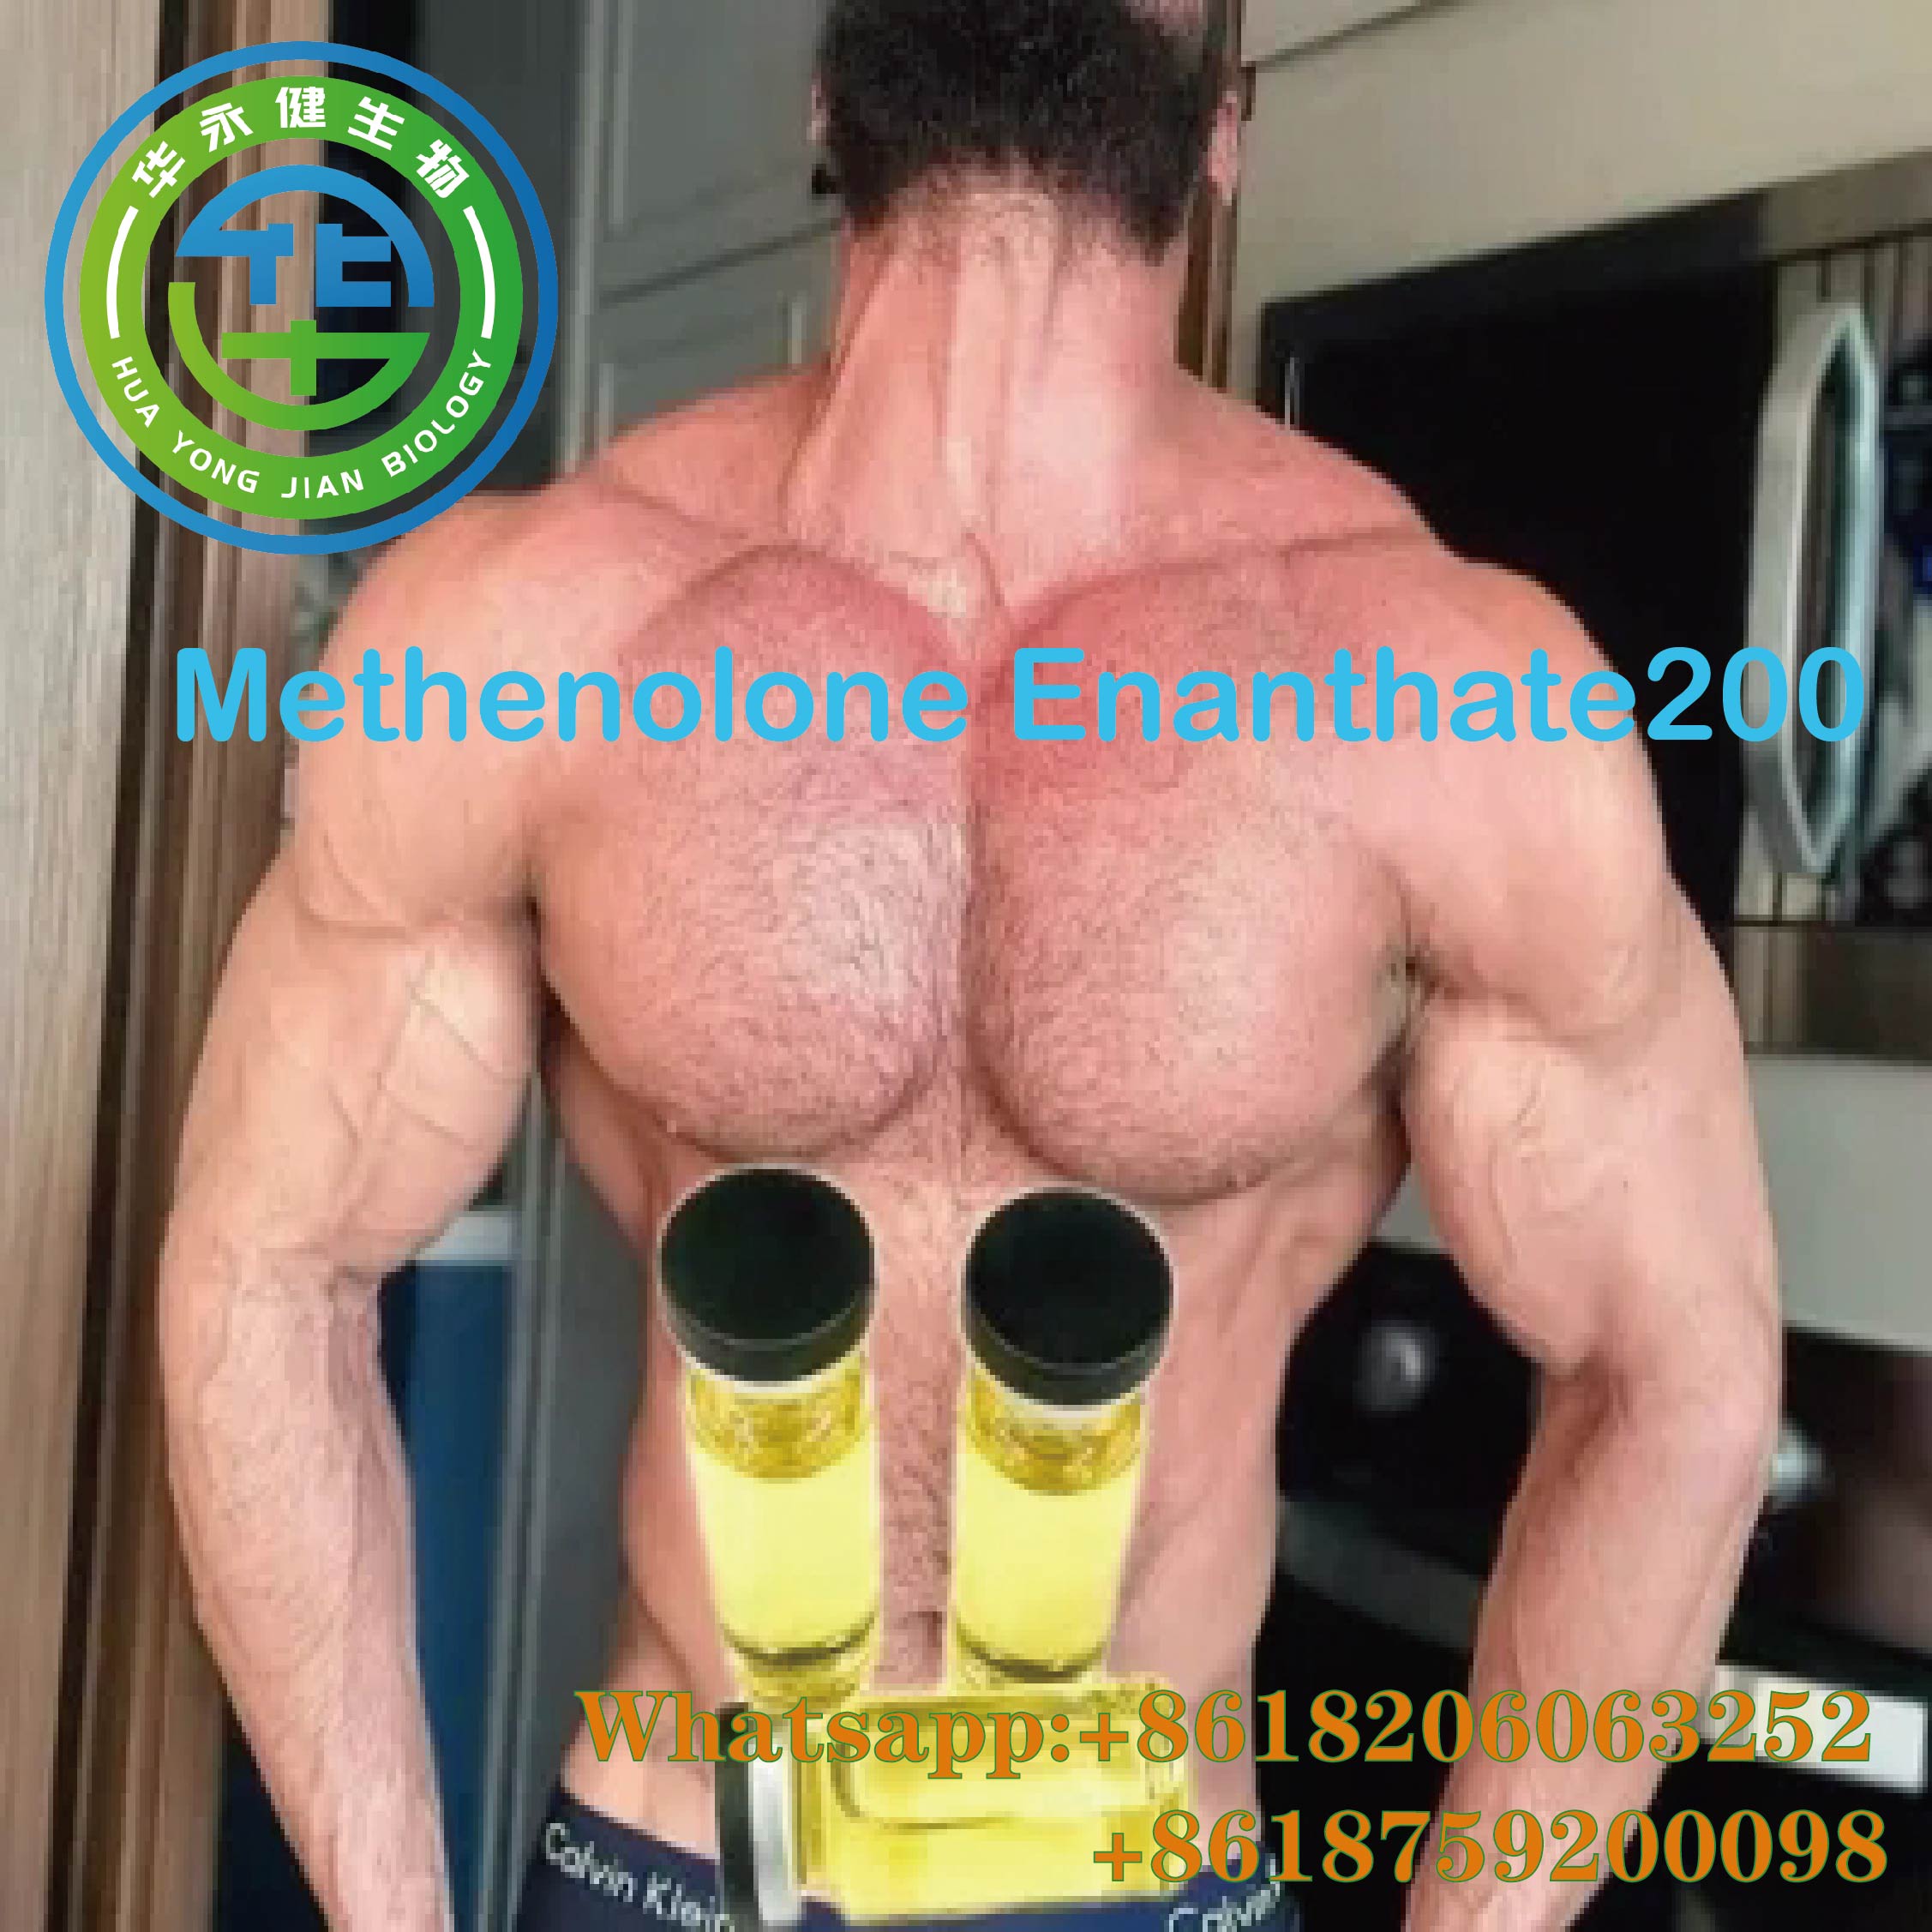 Primobolan Enanthate 200mg / ml  Strength Supplements Bodybuilding Yellow Liquid Methenolone Enanthate 200